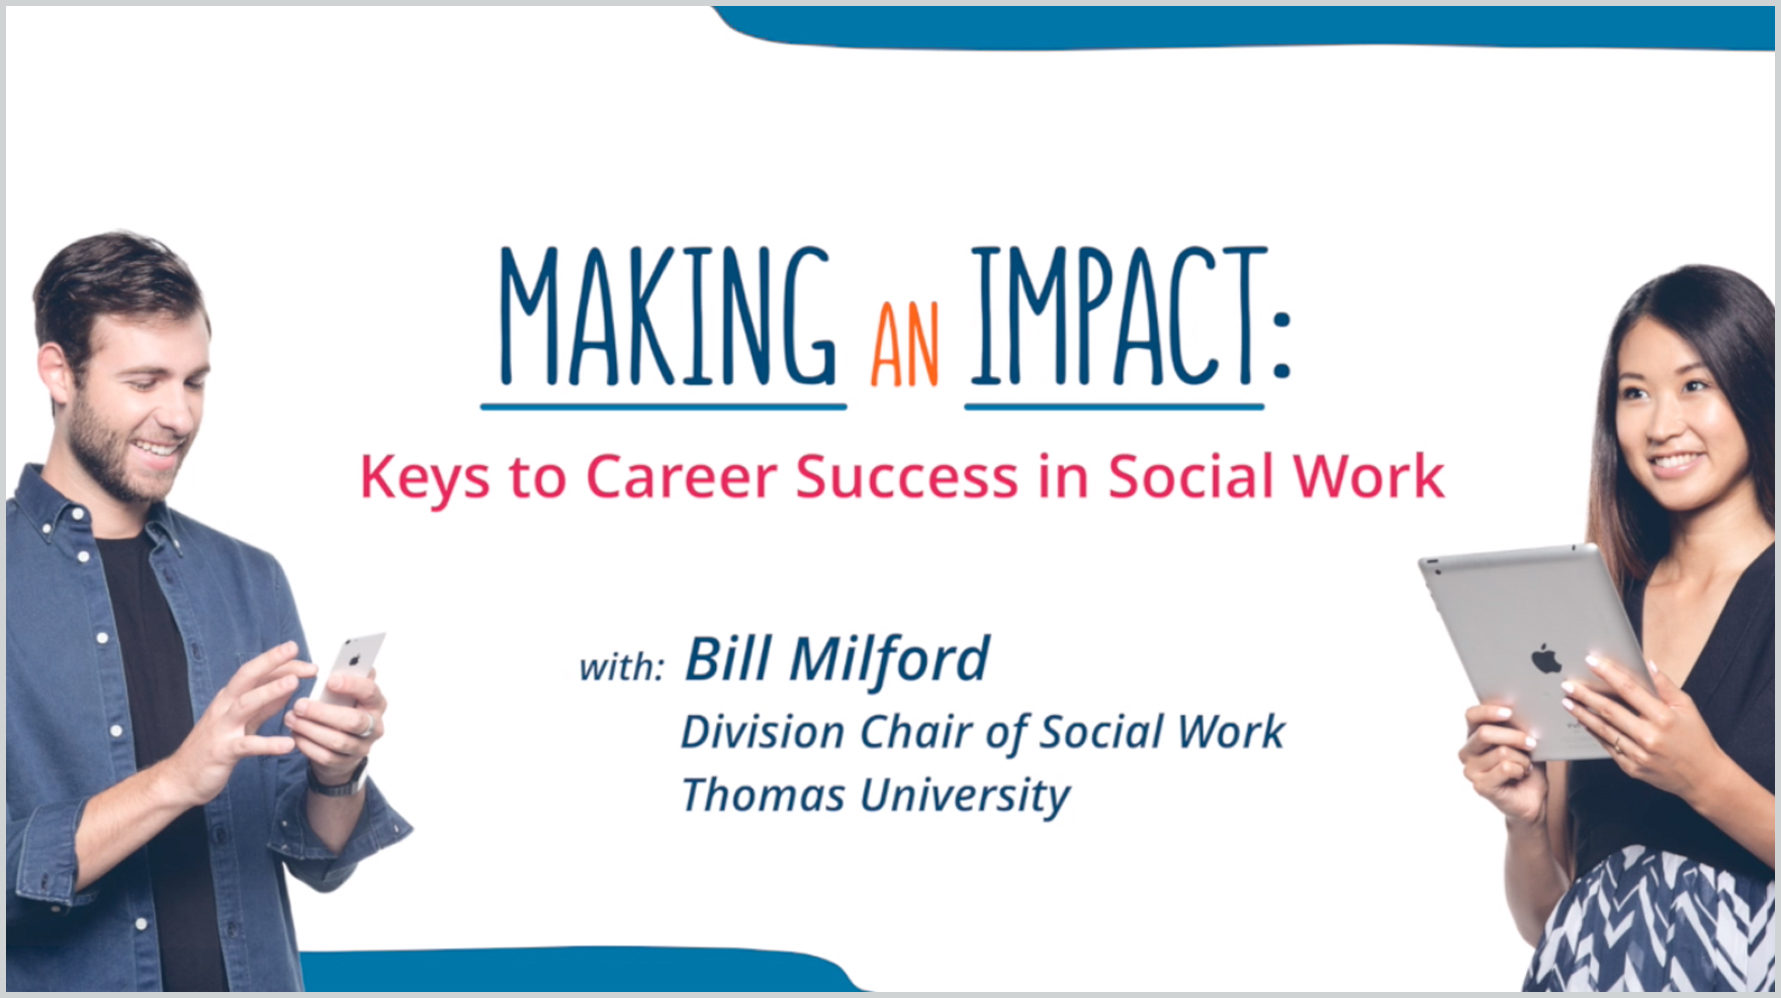 Title slide of Bill Milford's "Making an Impact: Keys to Career Success in Social Work" session.